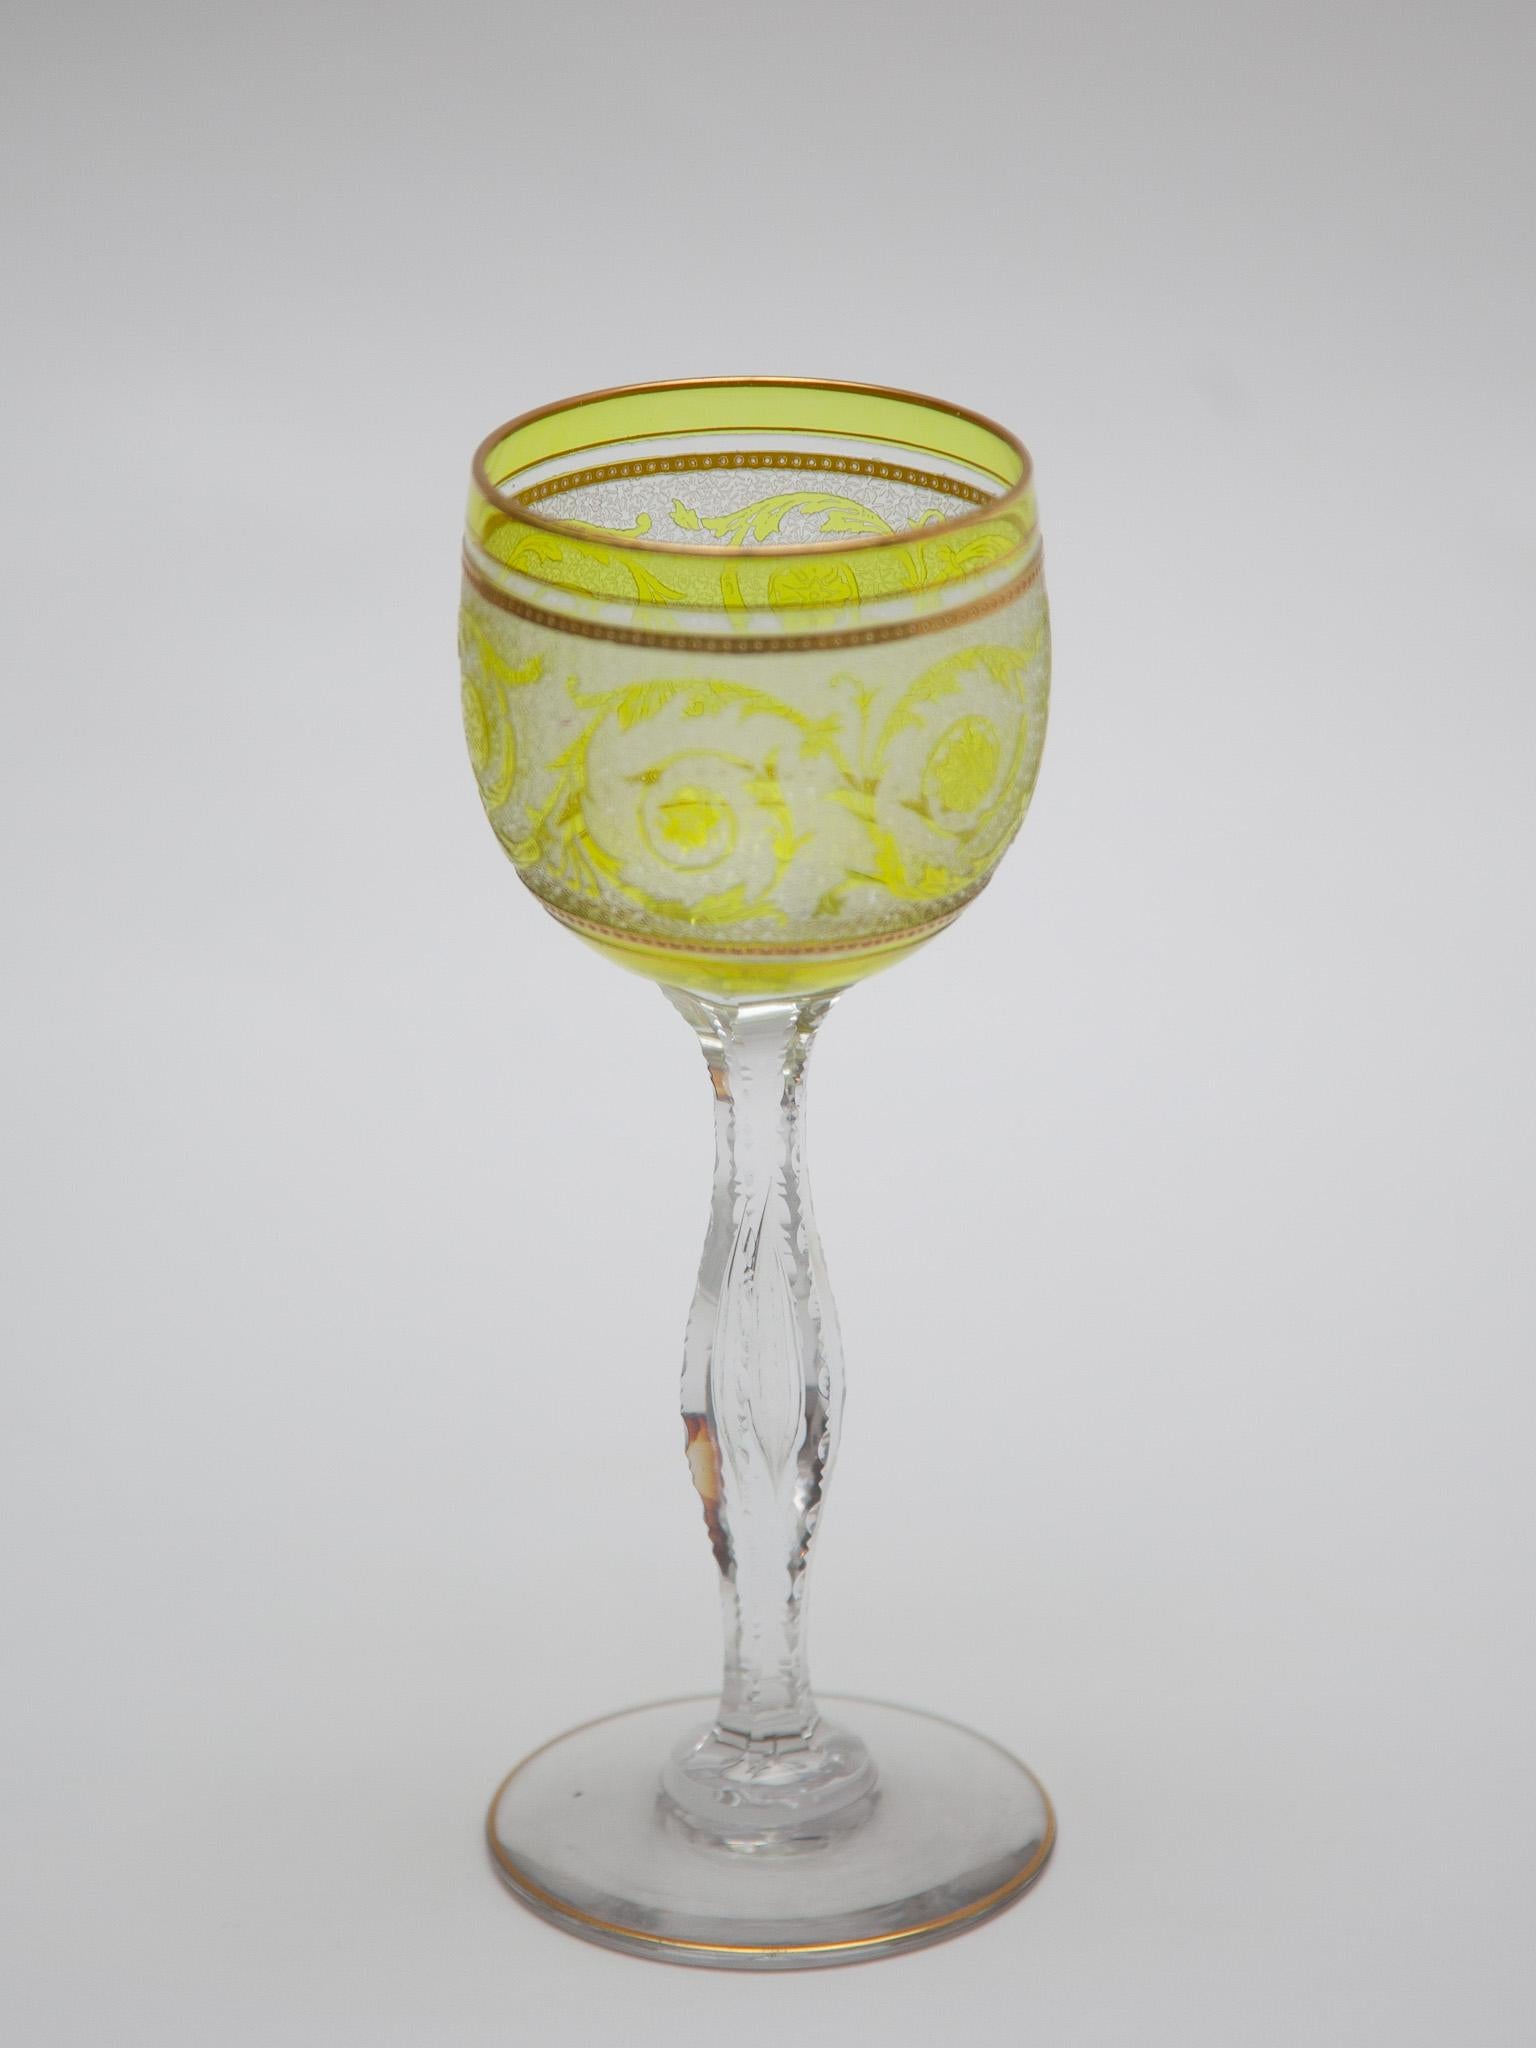 Very nice set French of six green wine-glasses made by Saint-Louis crystal date 1910 with a Thistle engraving and golden rings.The set glasses was created during the Art Nouveau movement in Europe and consists of mouth-blown, hand carved and